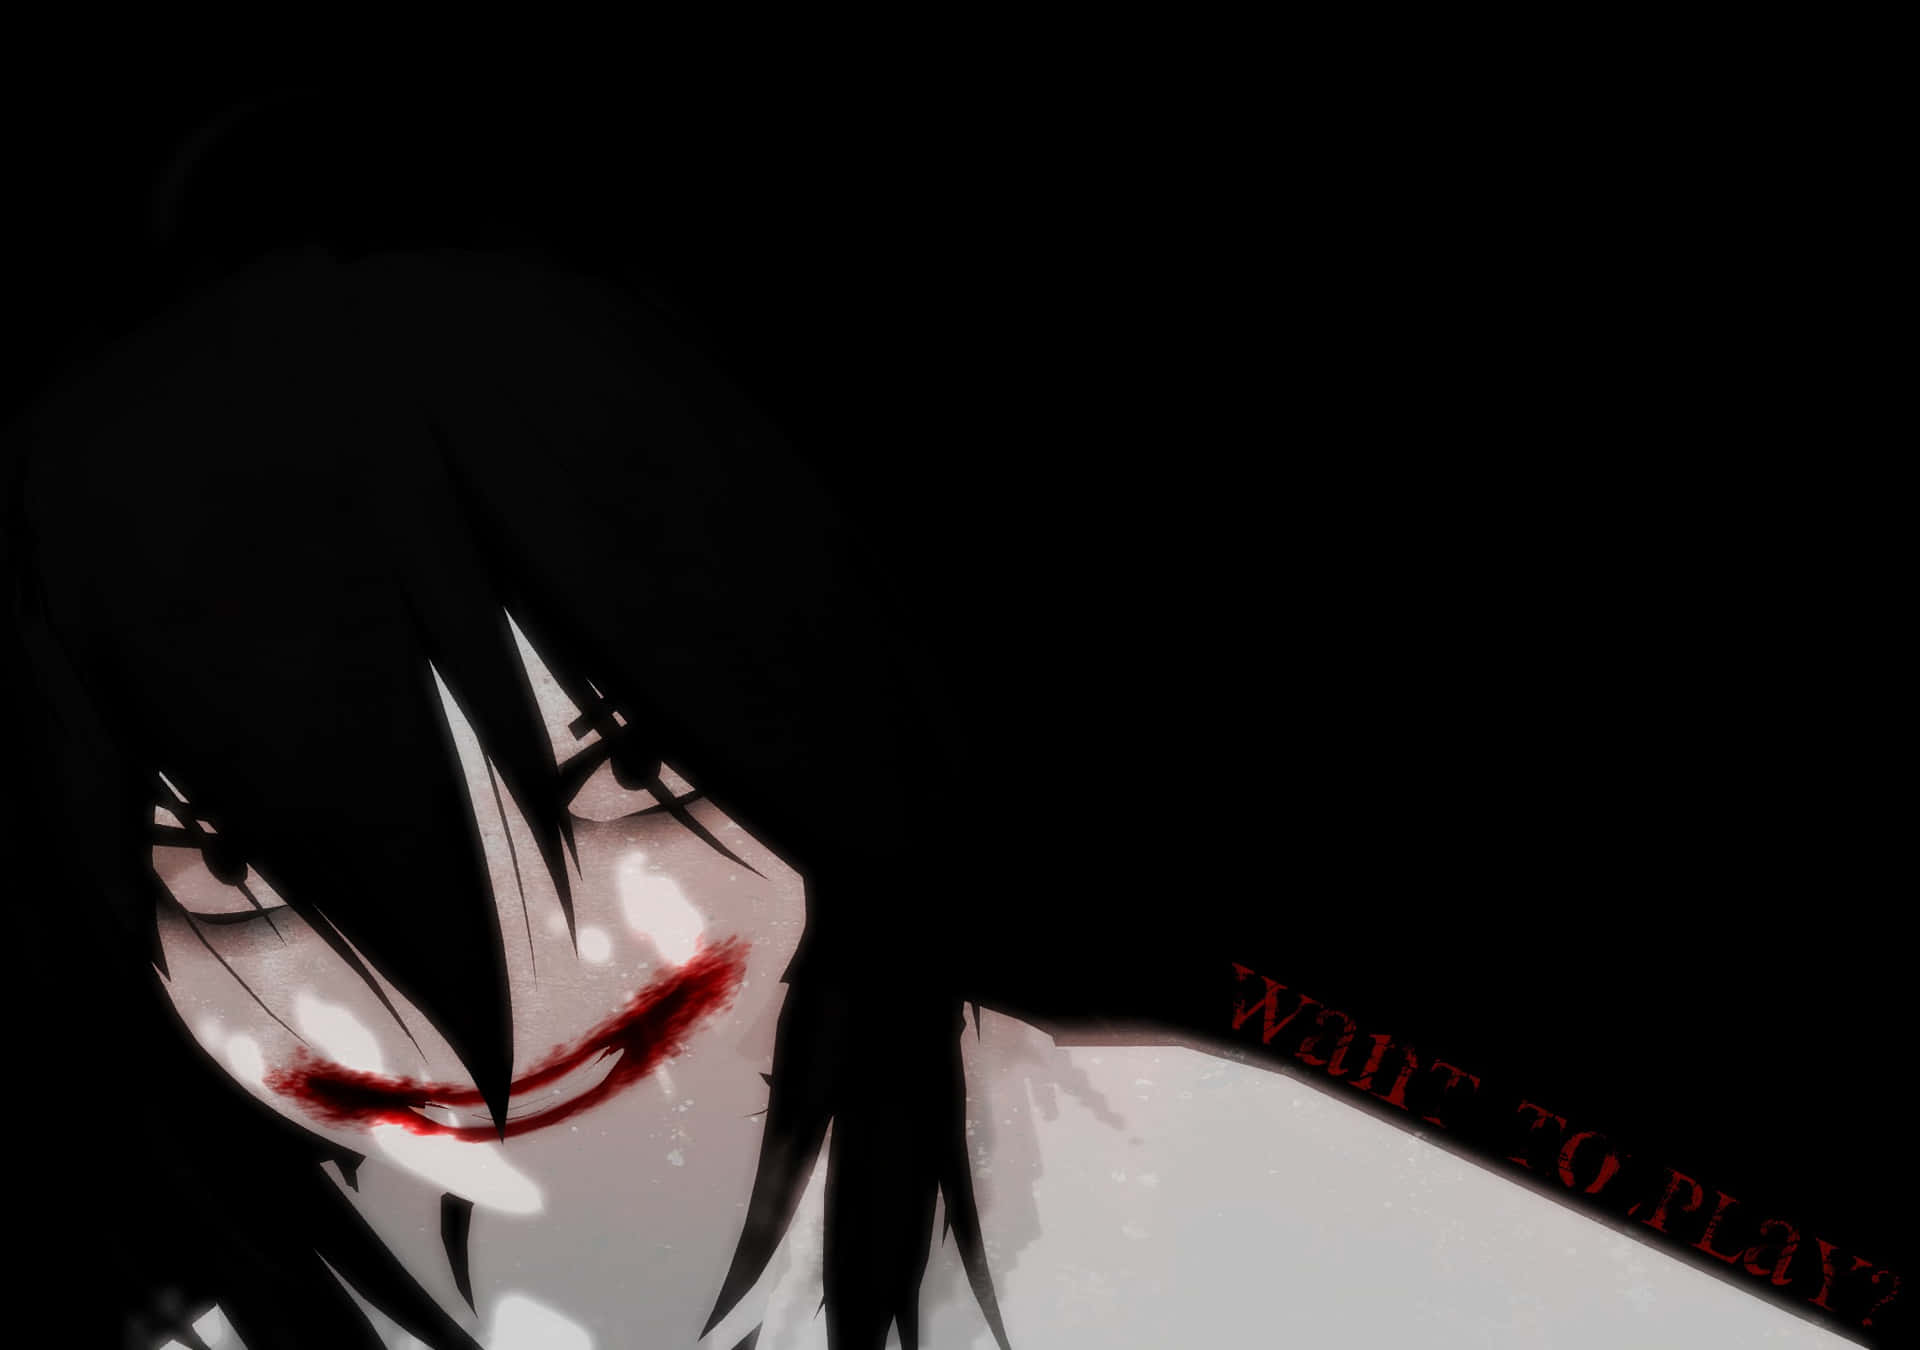 Jeff The Killer creeping in the shadows